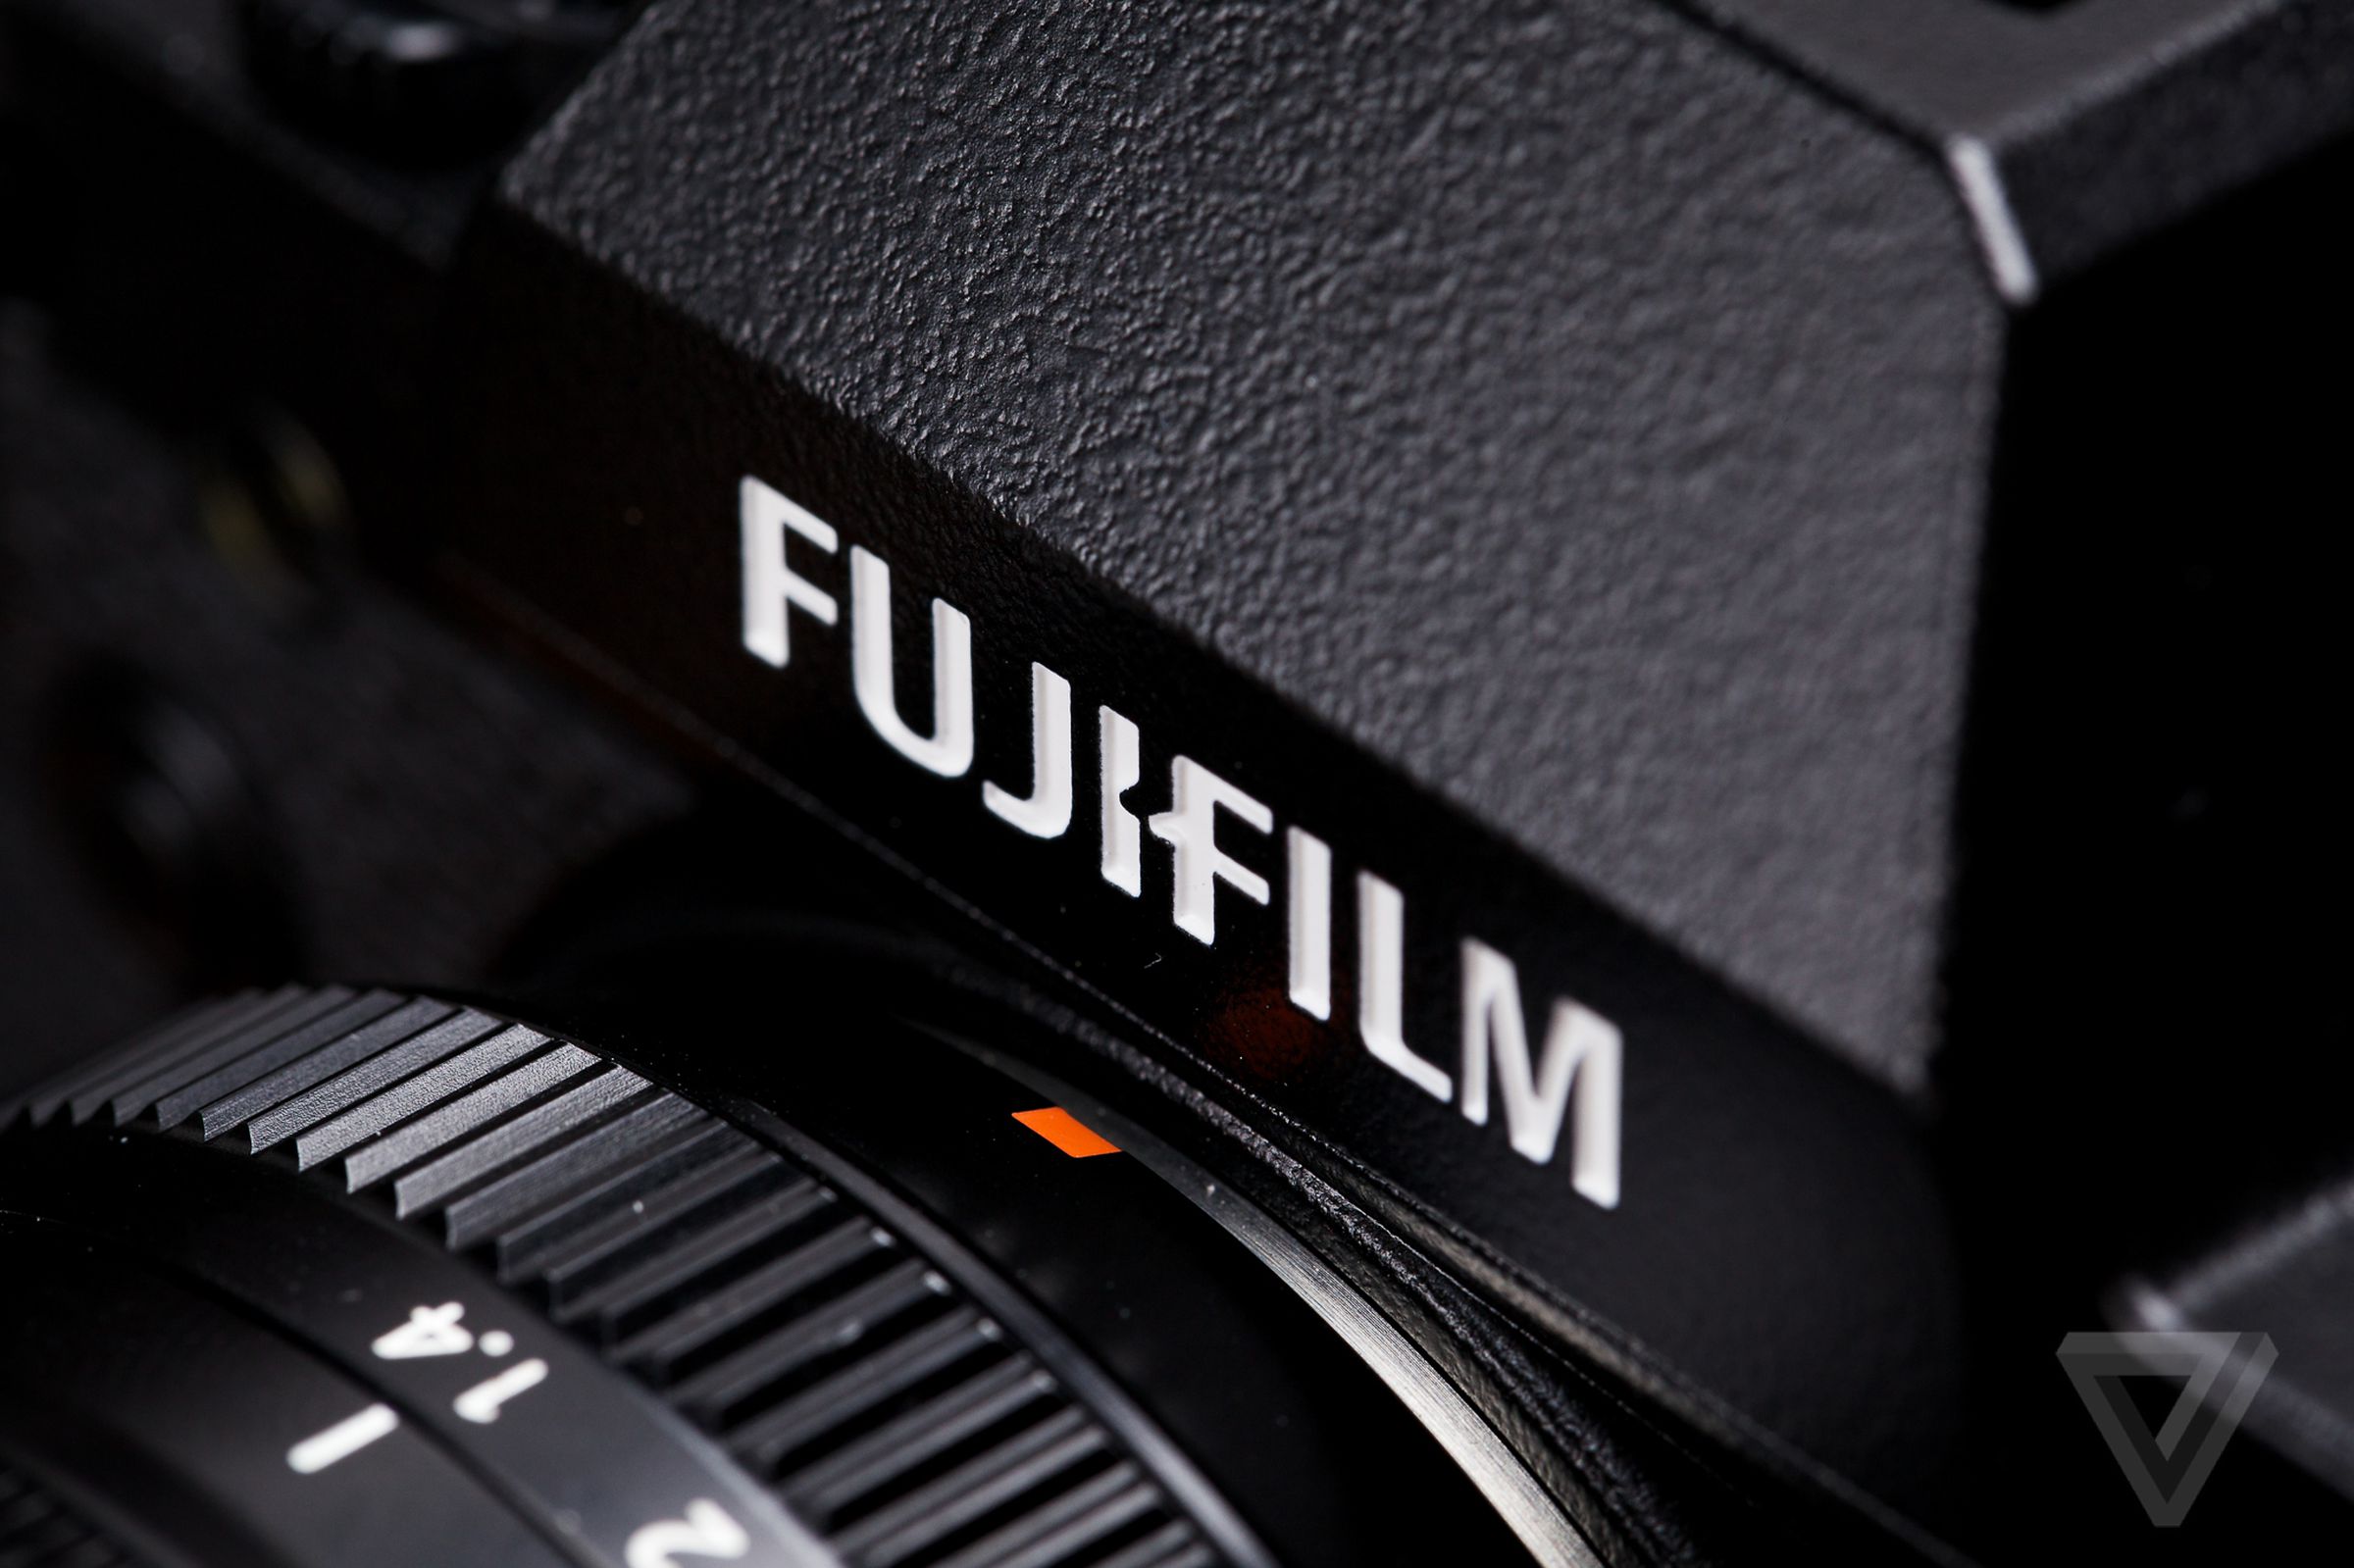 Fujifilm X-T1 pictures and sample shots